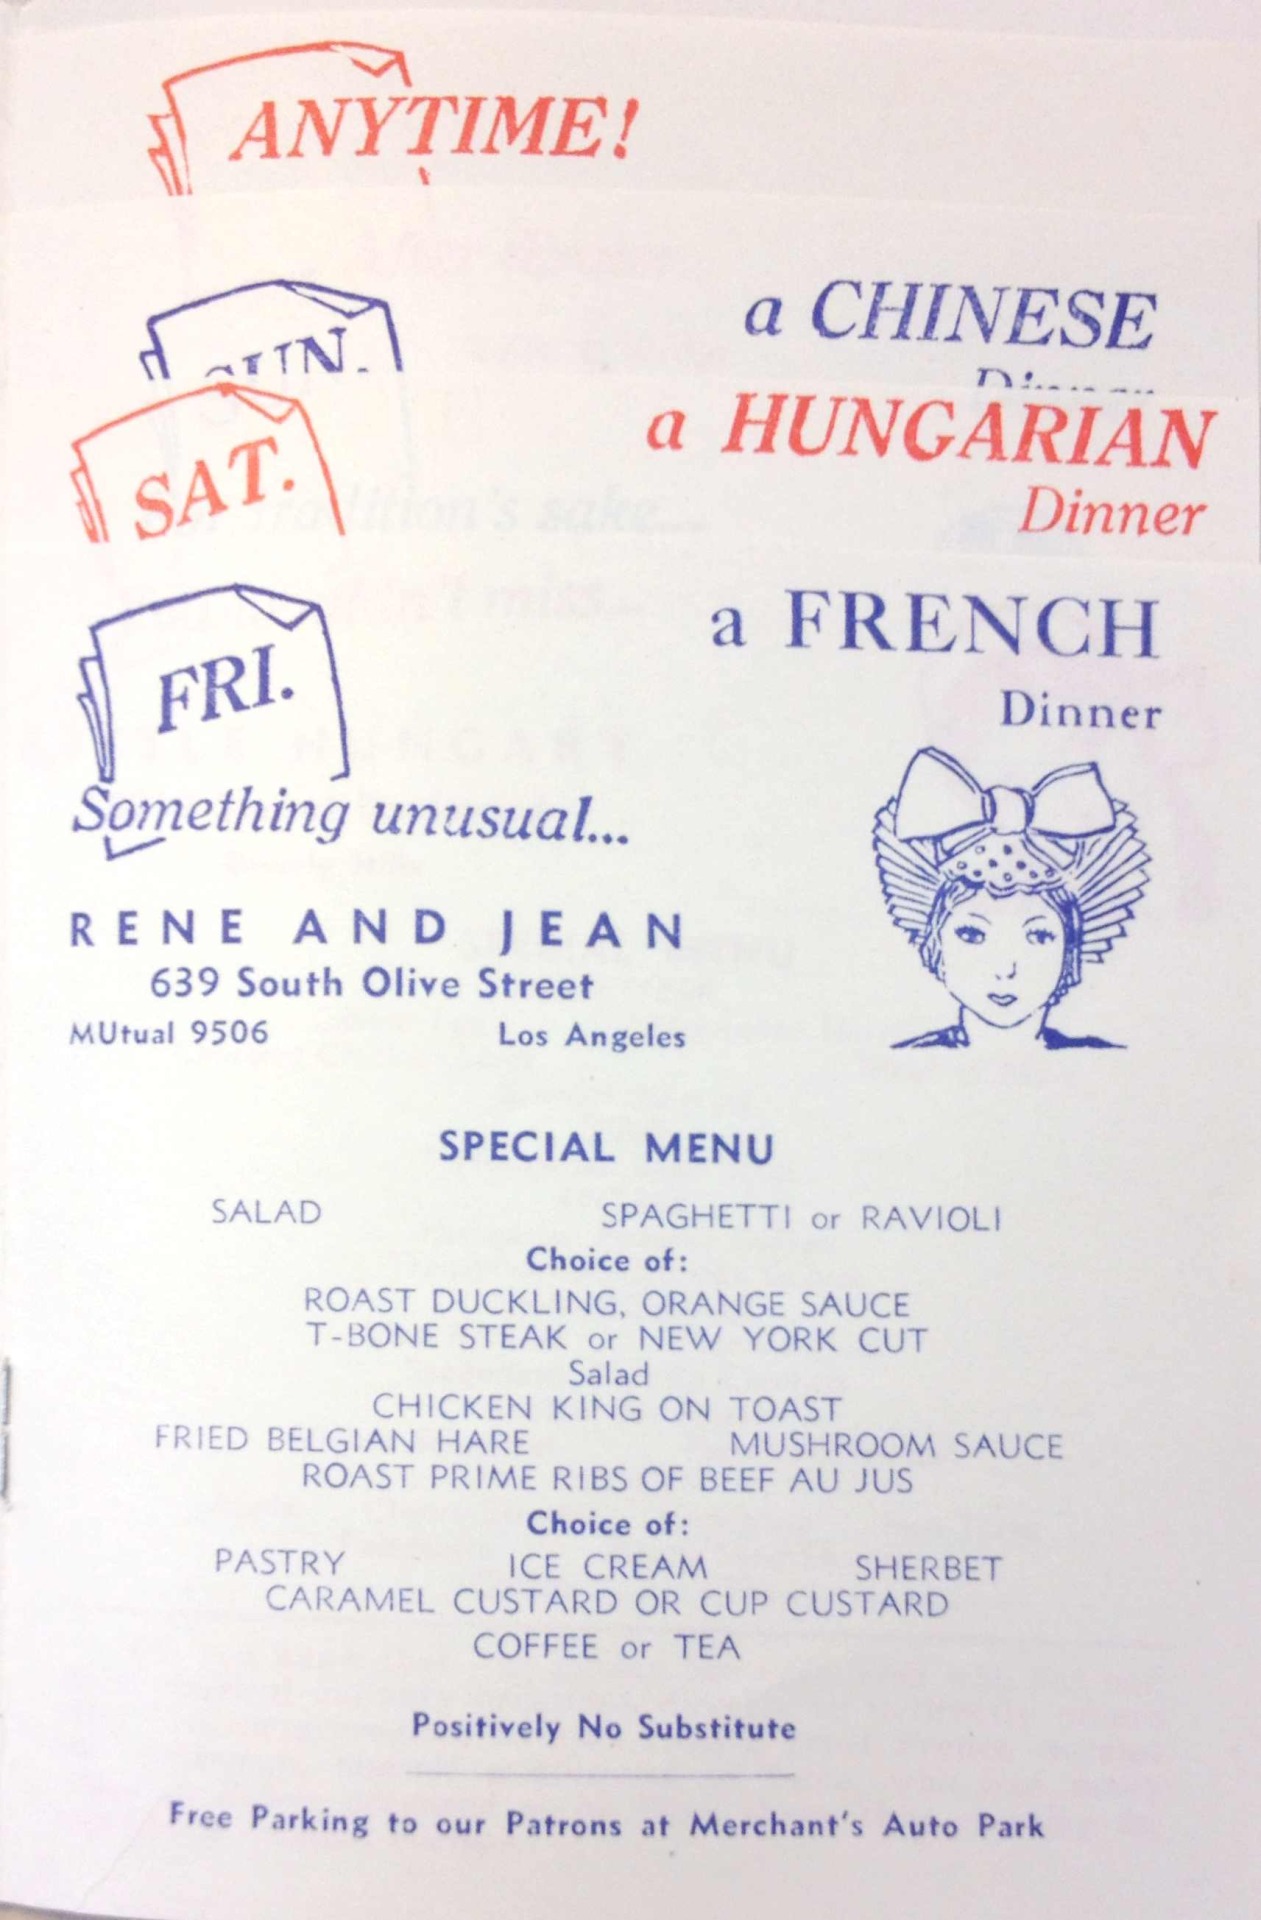 In the 1930s, The Weekly Publishing Service of Los Angeles provided a free menu guide each week. This one from January 17-23, 1937 was focused on “Foreign Cooking” that could be had without leaving Los Angeles (unless you wanted to get aboard the...